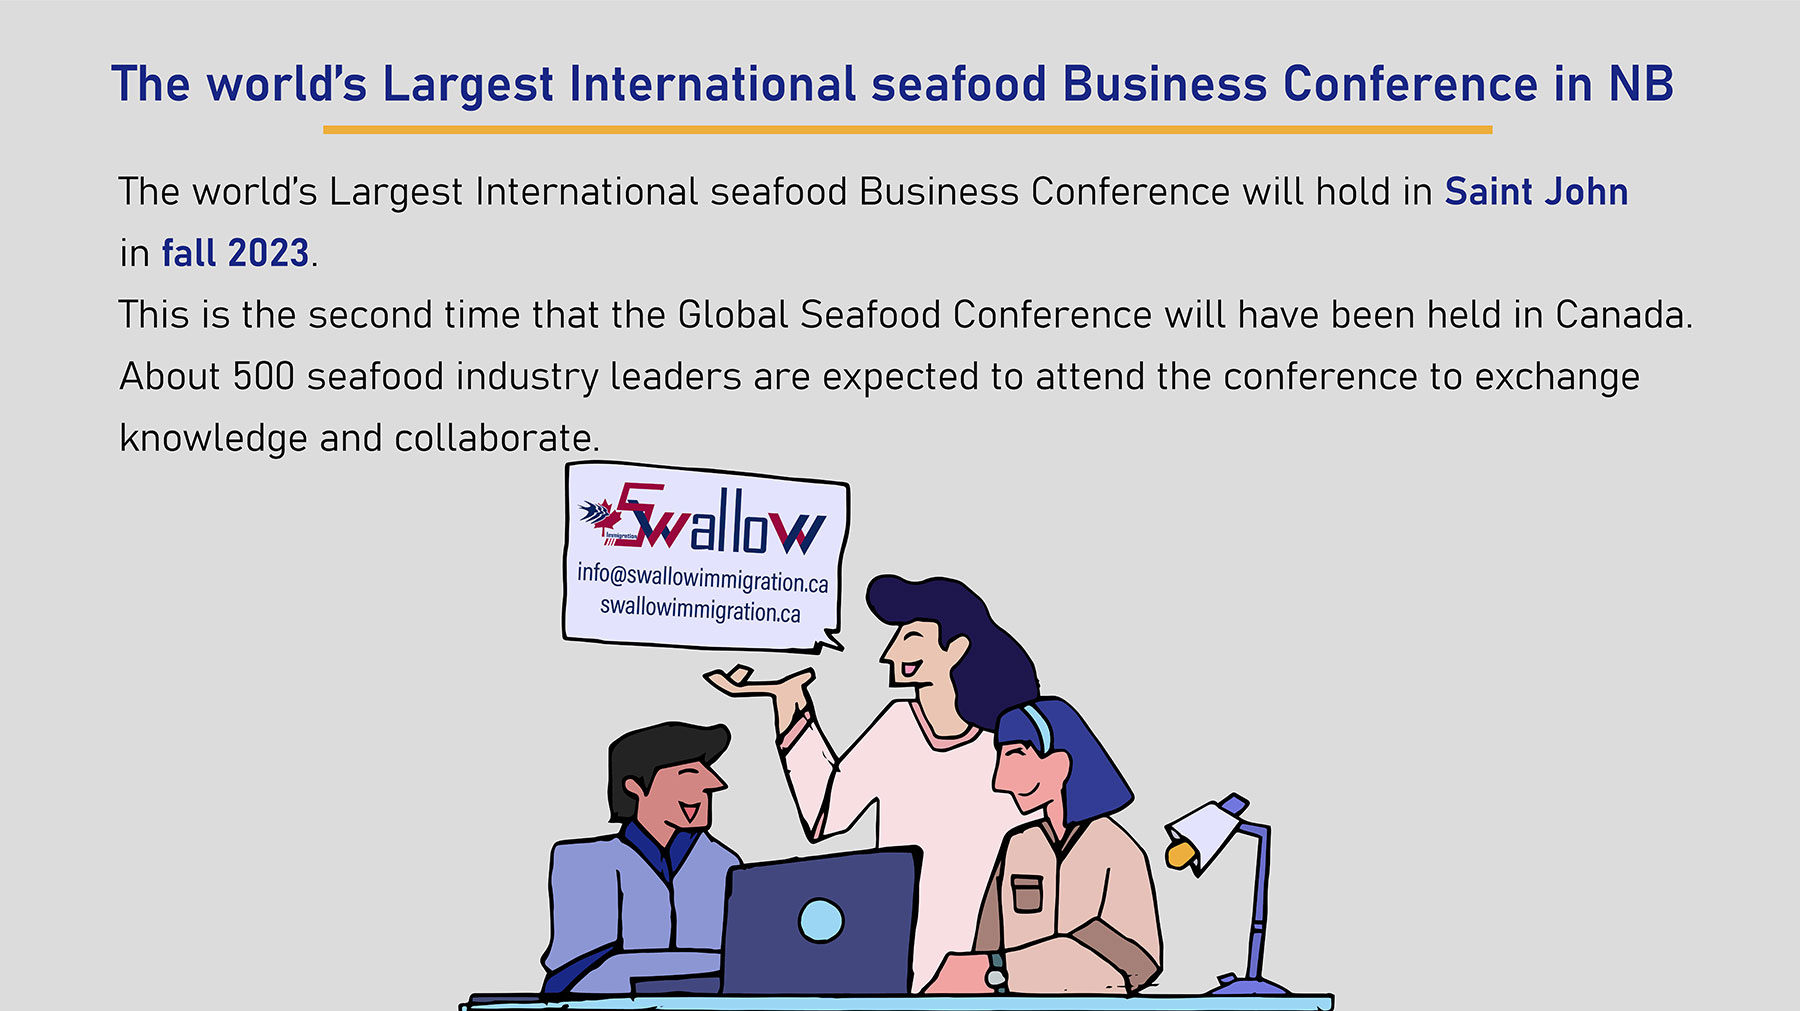 he world’s Largest International seafood Business Conference in NB